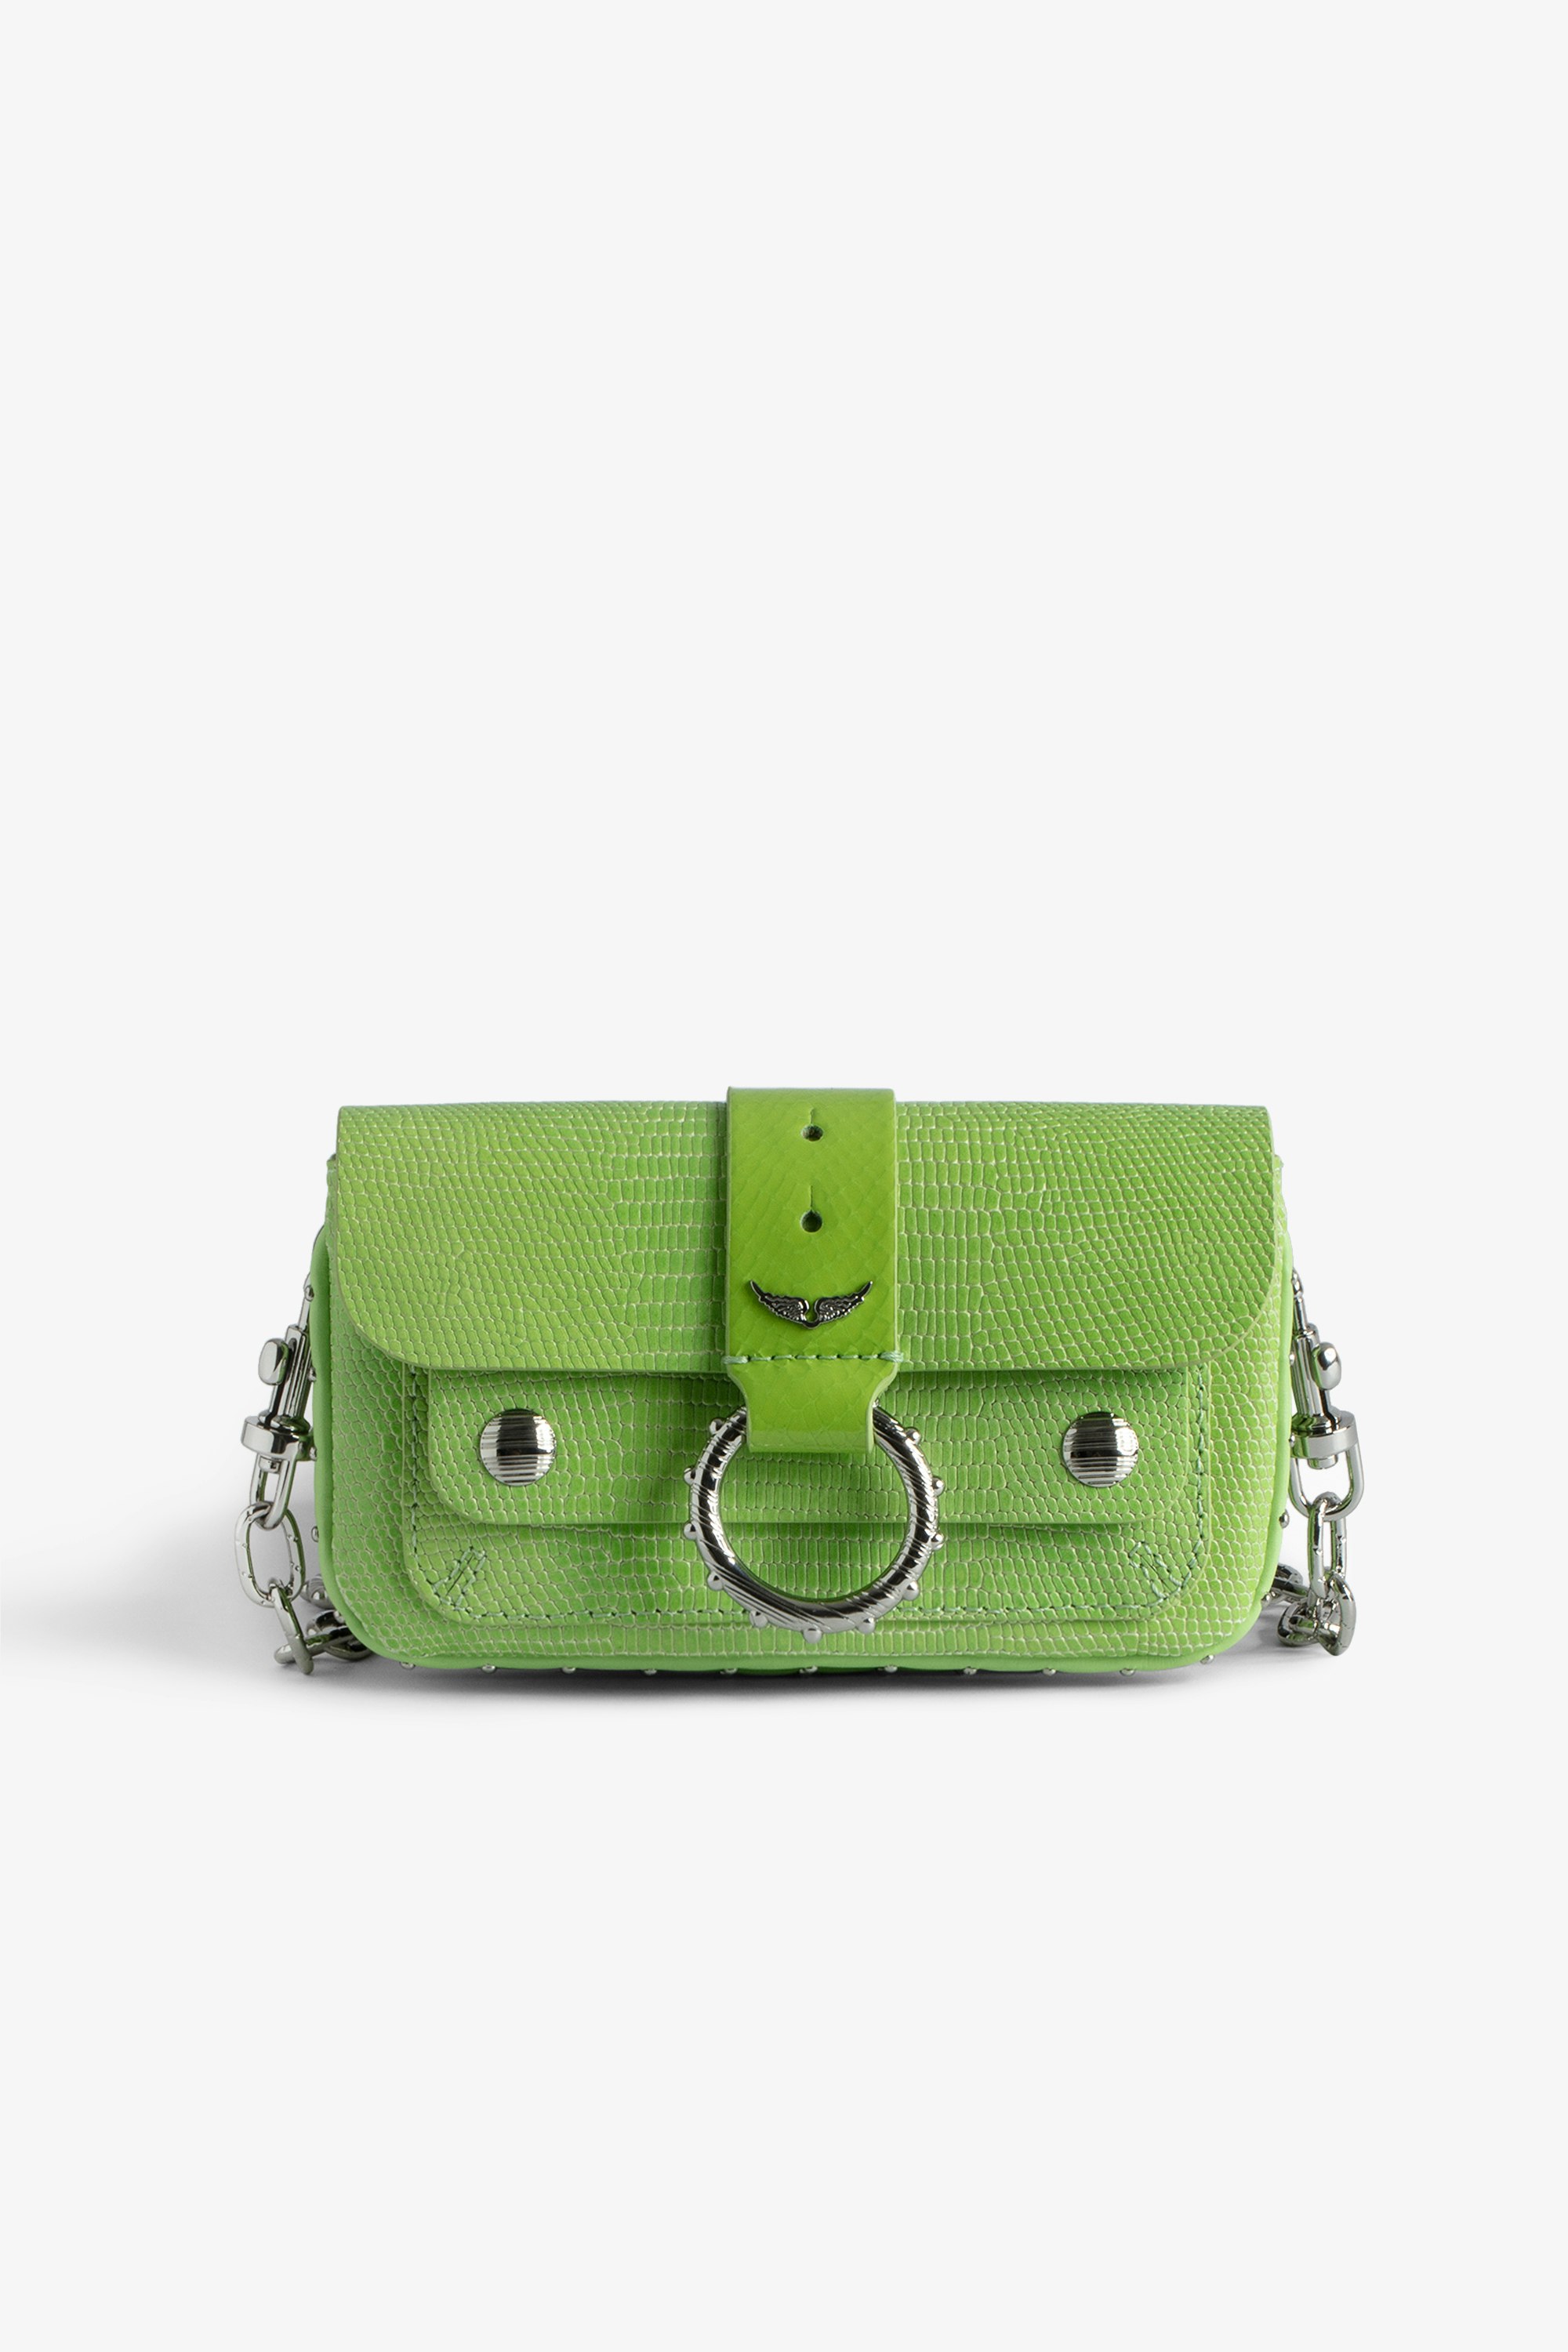 Kate Embossed Wallet Bag - Women’s green iguana-effect patent leather mini bag with metal chain.